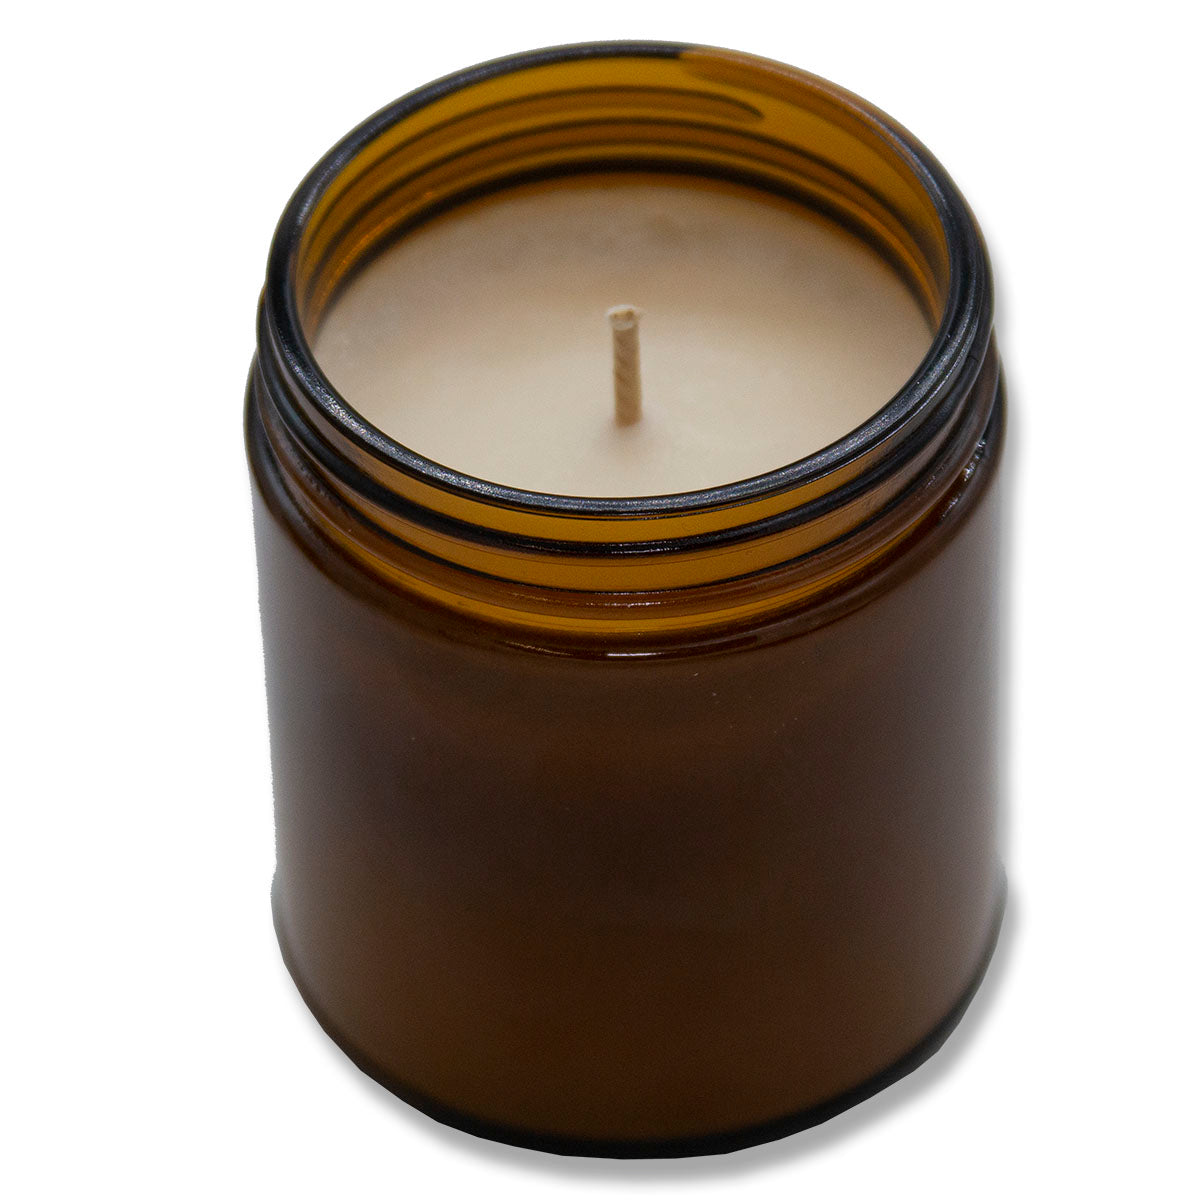 Mulled Cider, Lone Star Candles & More's Premium Hand Poured Strongly Scented Soy Wax Gift Candle, The scent of Sweet N Spicy Cider, USA Made in Texas, Round Amber Glass Jar 9oz Happy Birthday